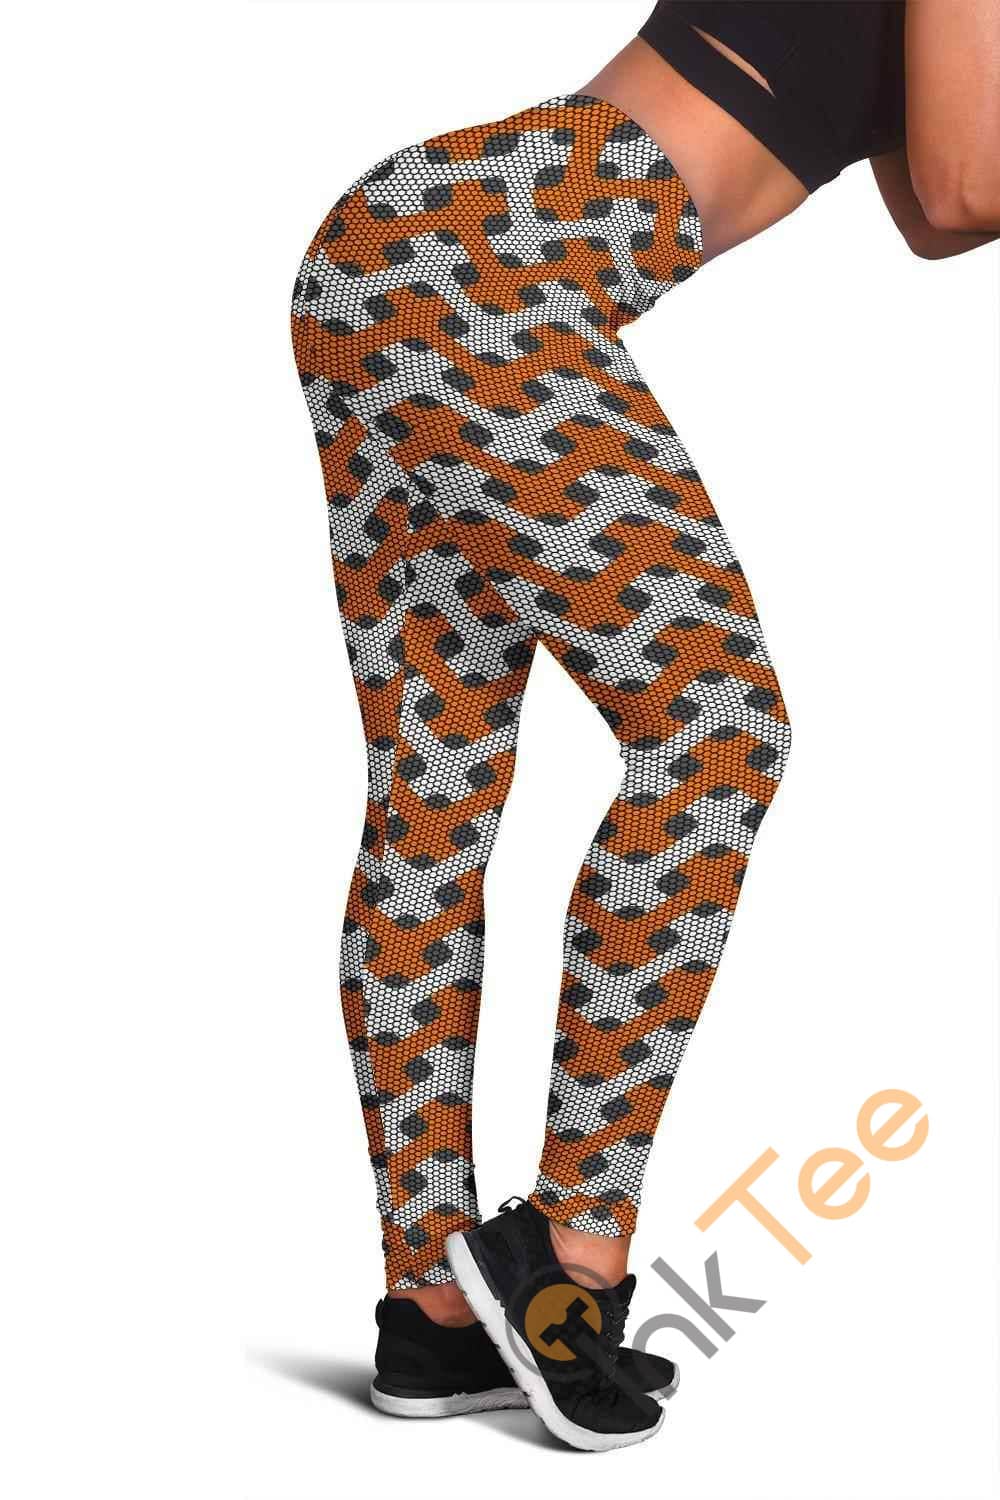 Inktee Store - Tennessee Volunteers Inspired 3D All Over Print For Yoga Fitness Fashion Women'S Leggings Image